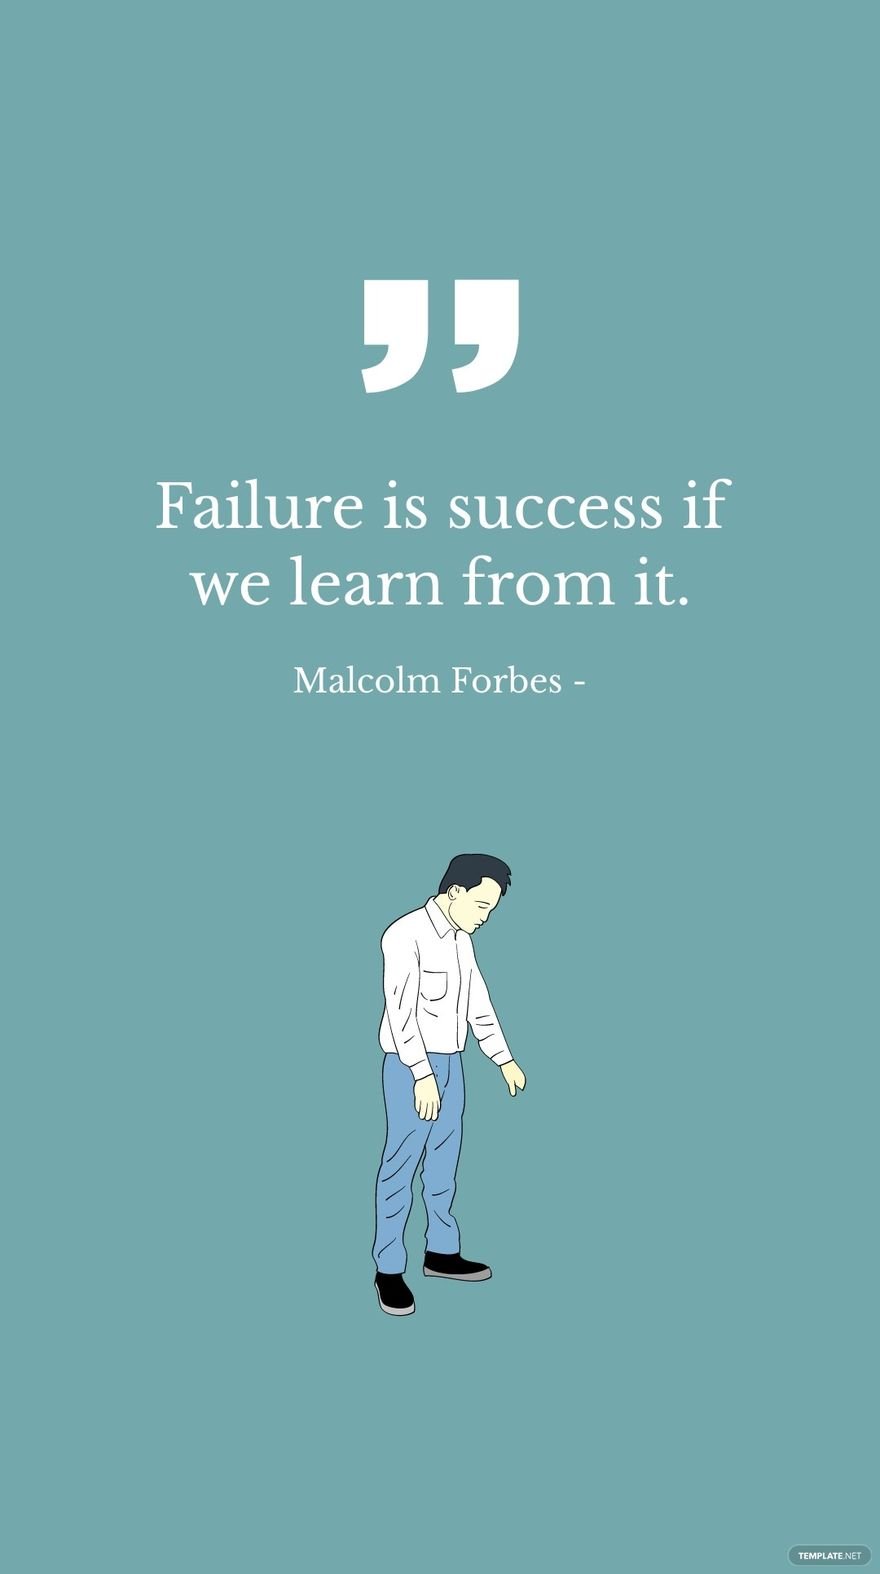 Free Malcolm Forbes - Failure is success if we learn from it. in JPG